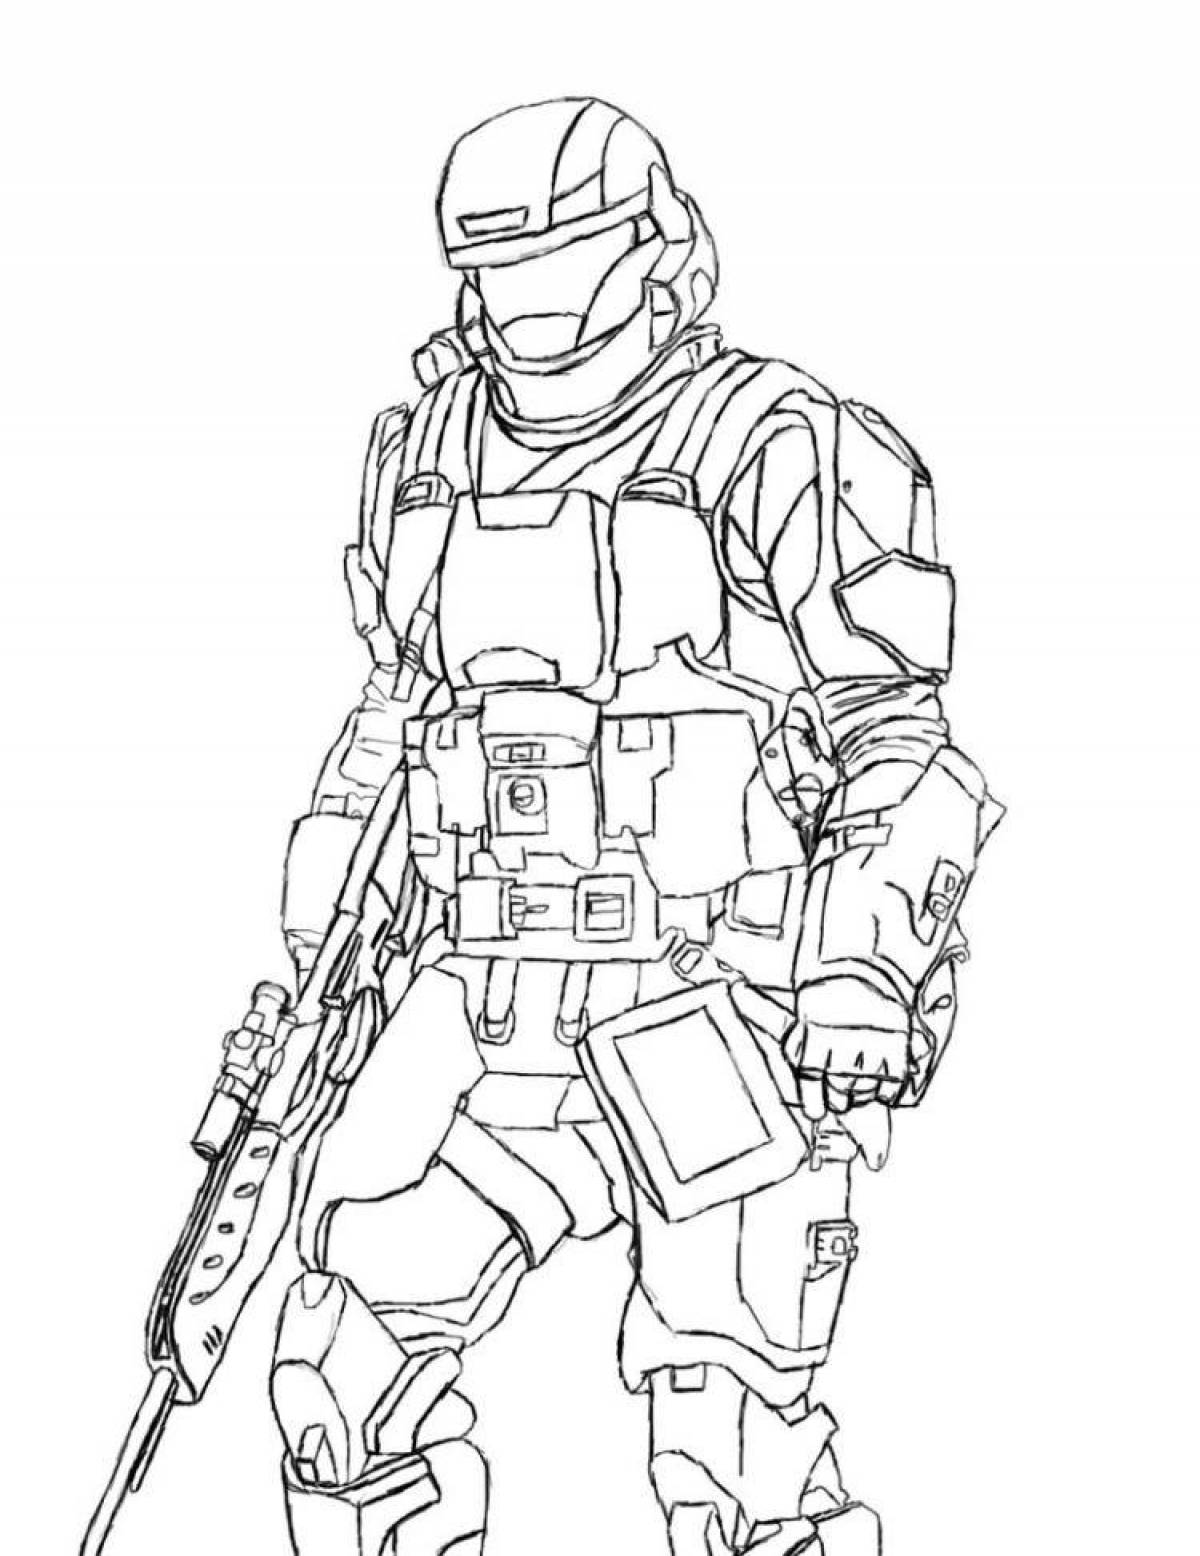 Counter strike playful coloring page